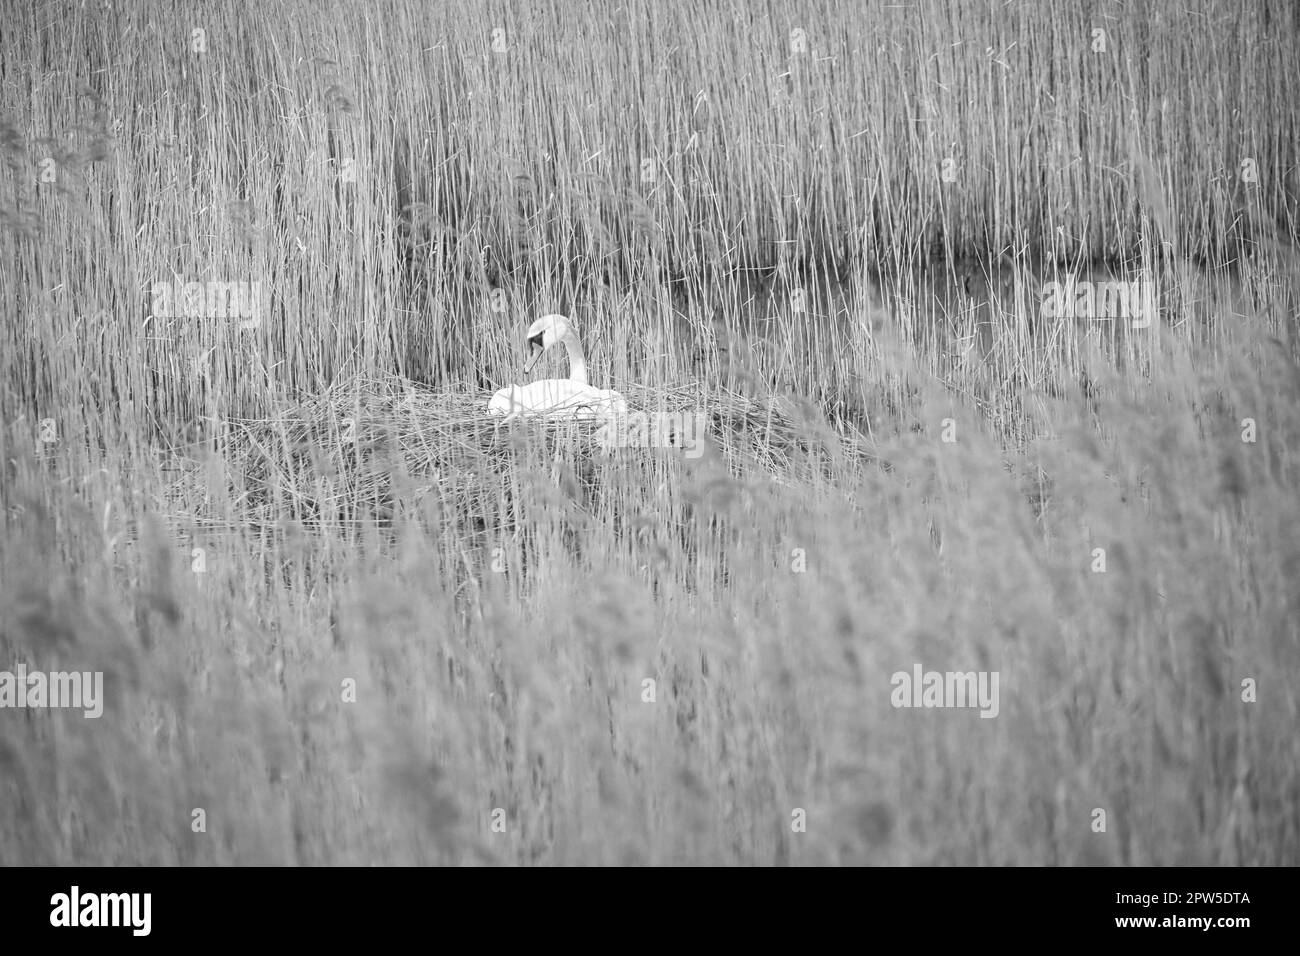 Mute swan in black and white, breeding on a nest in the reeds on the Darrs near Zingst. Wild animals in the wild. Elegant birds Stock Photo